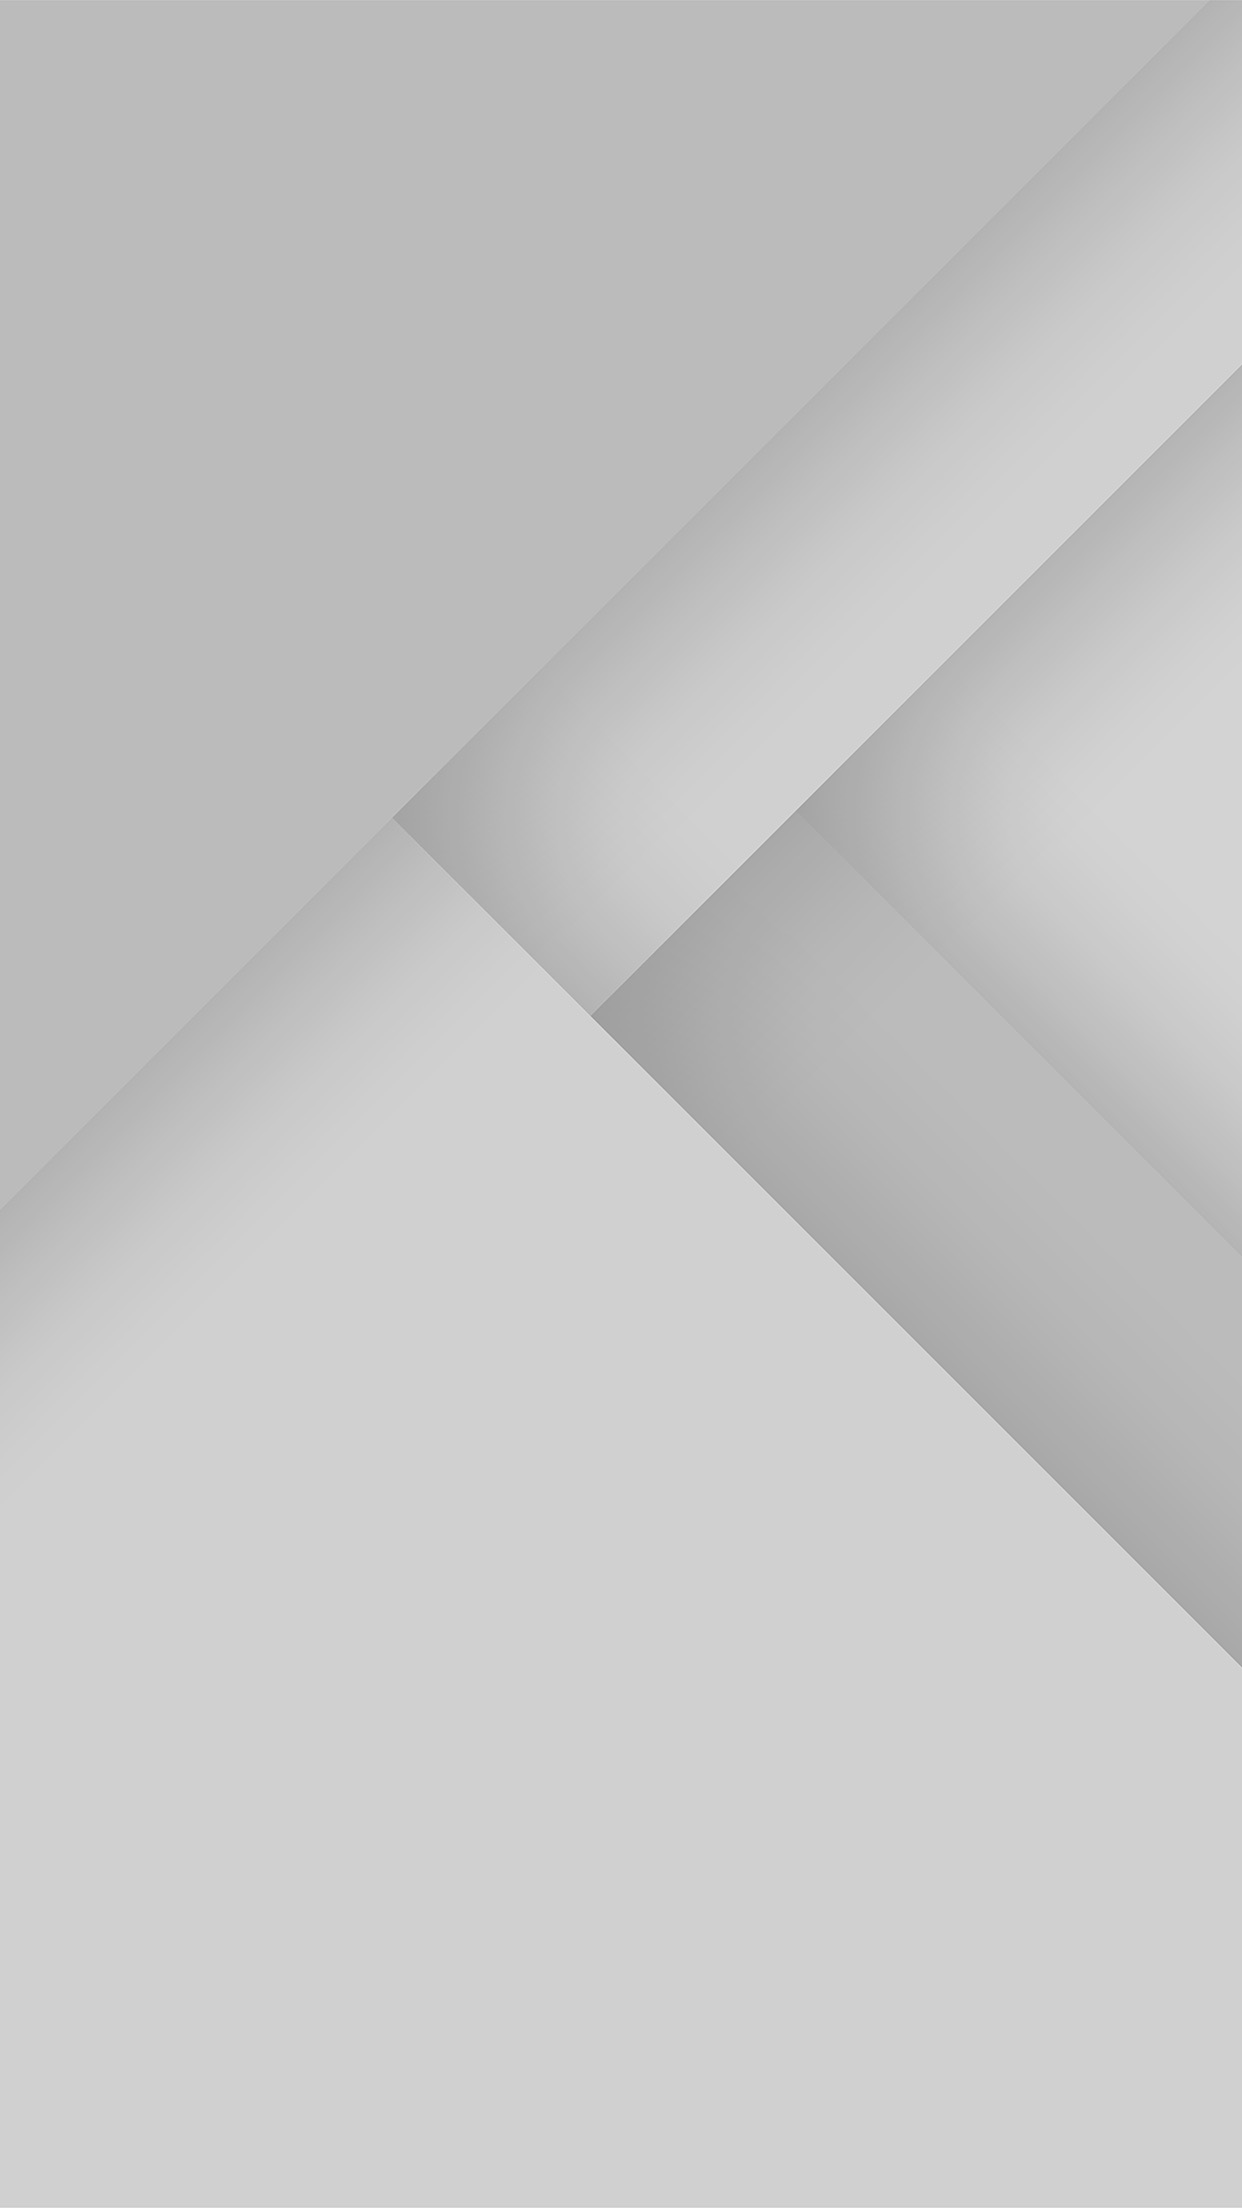 Android Lollipop Material Design White Pattern Android wallpaper